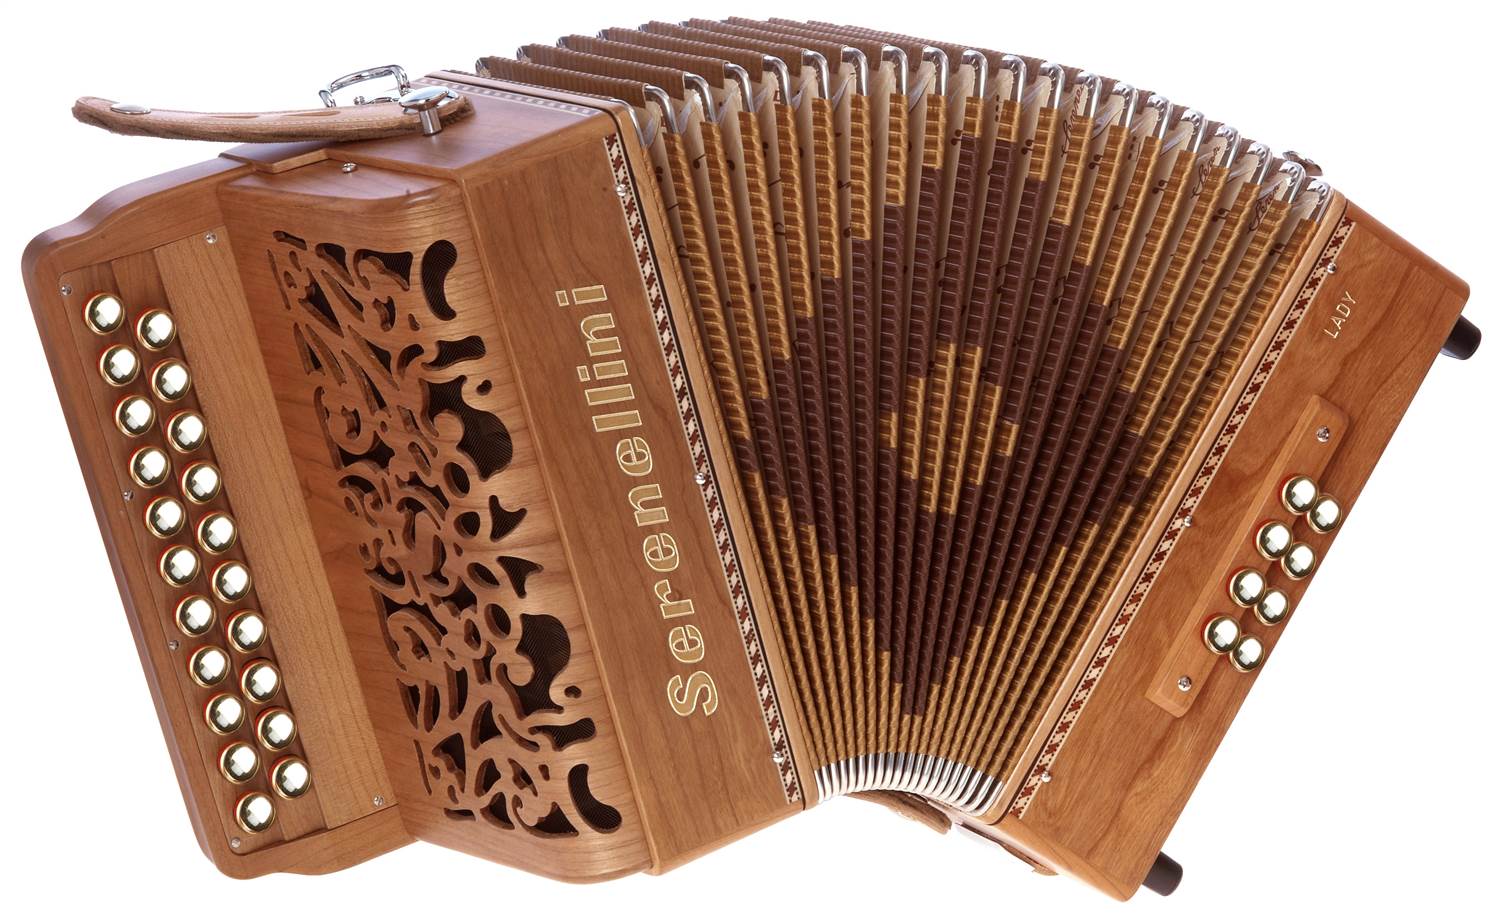 Serenellini Accordions - 100% Made in Italy